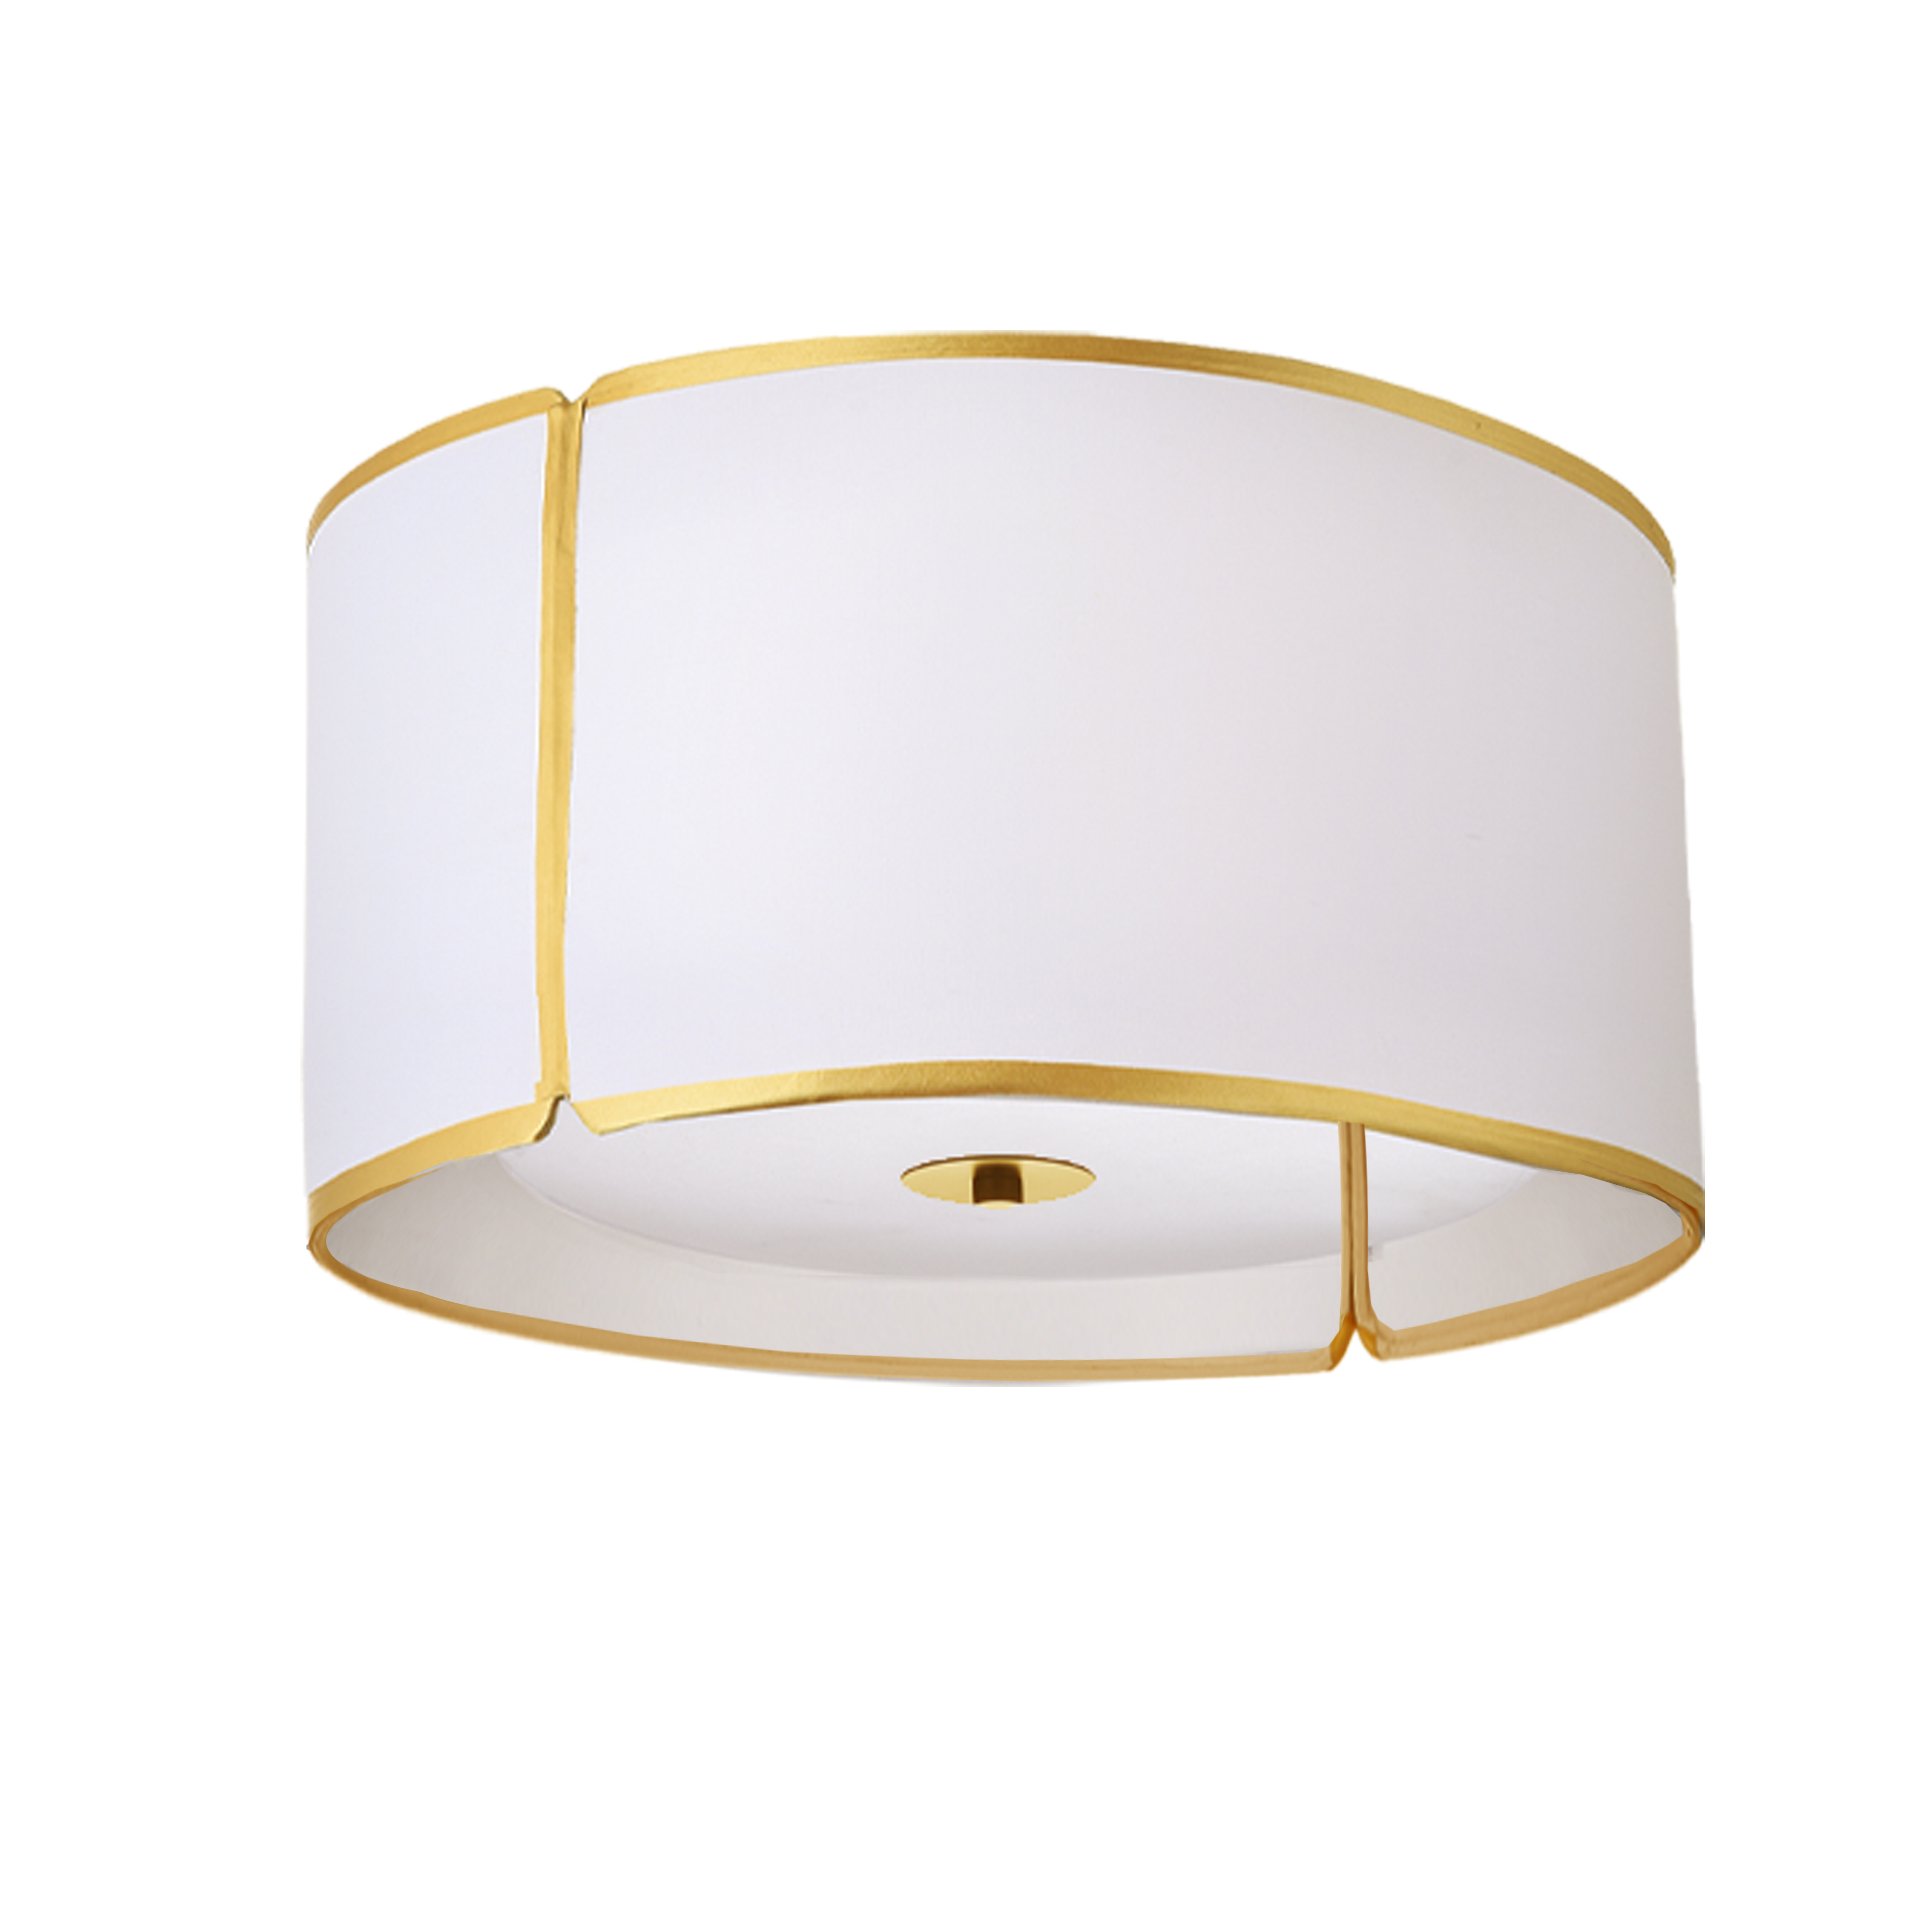 Fabric drum lighting offers a look that can't be ignored, but is simple enough to blend in with strong modern and contemporary décor schemes. Clean lines and an elegant shape give it a luxurious appeal. A simple metal drop and frame is dominated by a fabric drum shade in a Notched design with a strong linear appeal. Contrasting shade and metal frame create an airy look with dramatic appeal. With options and configurations that include pendant or flushed mount lighting, Notched Drum lighting is a fashionable way to unify the look of a modern home.